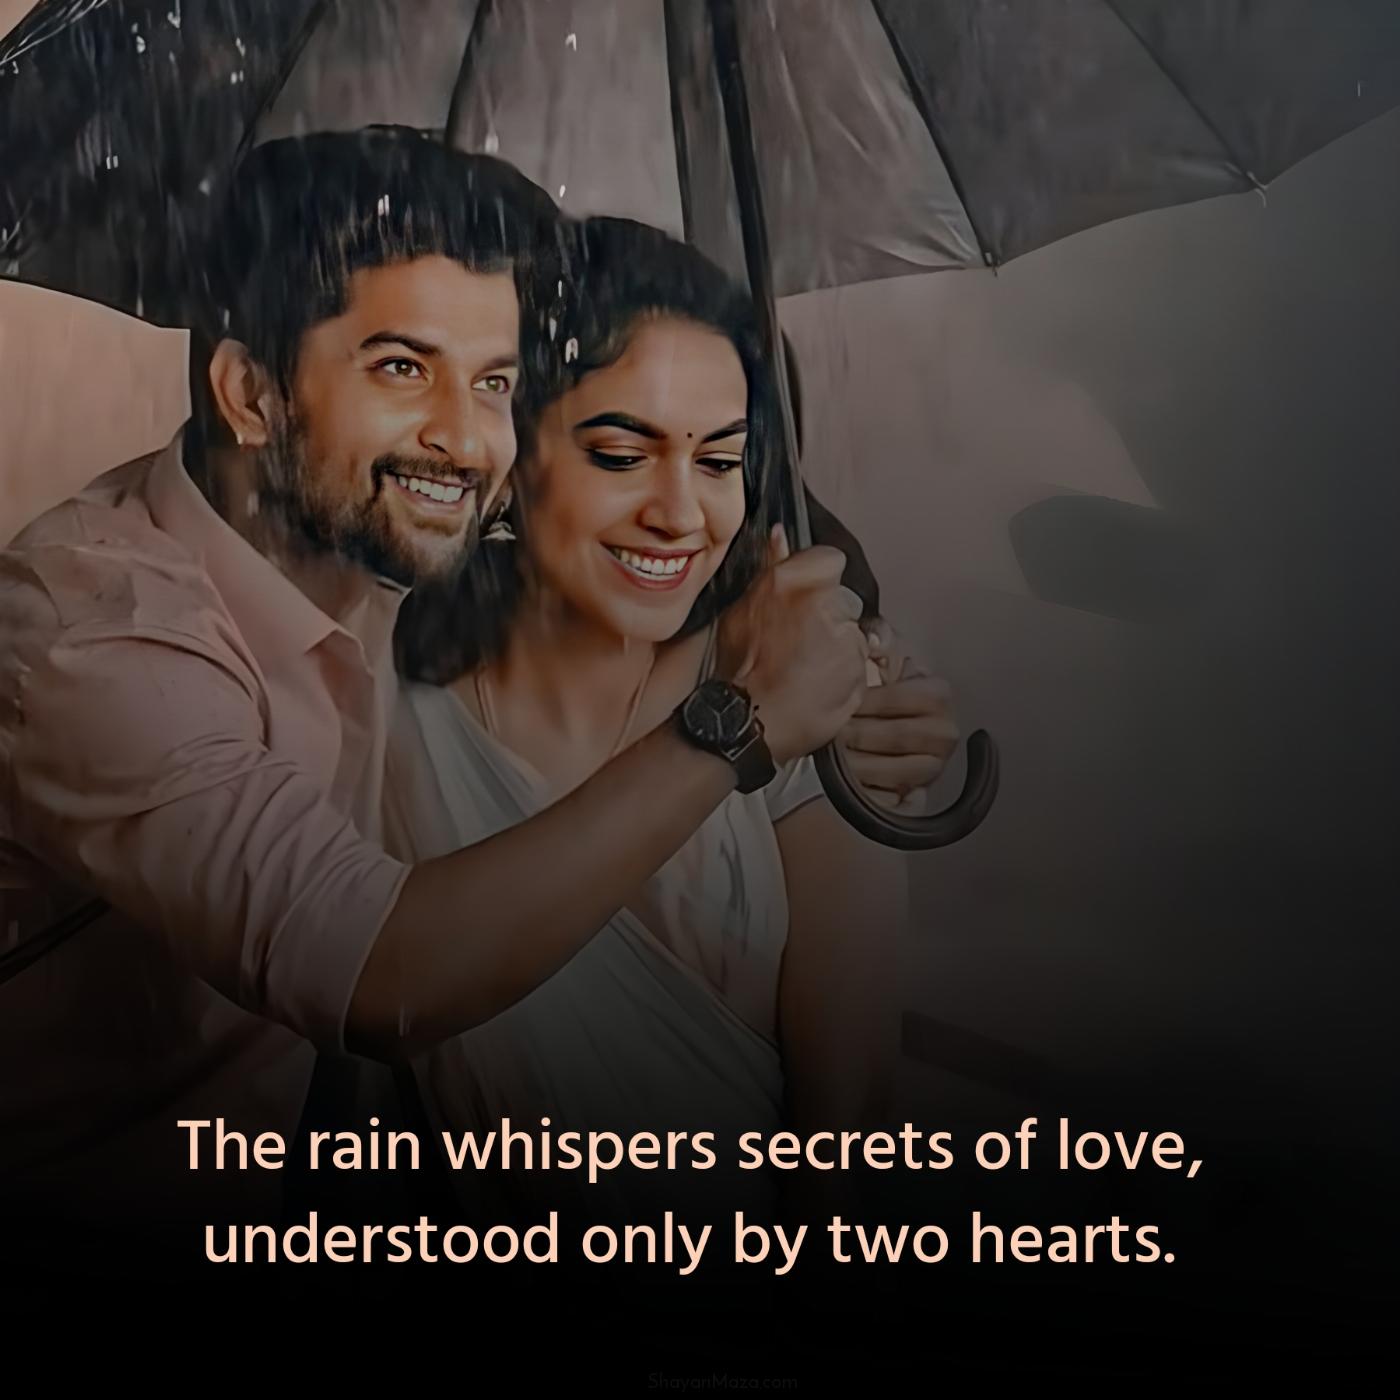 The rain whispers secrets of love understood only by two hearts